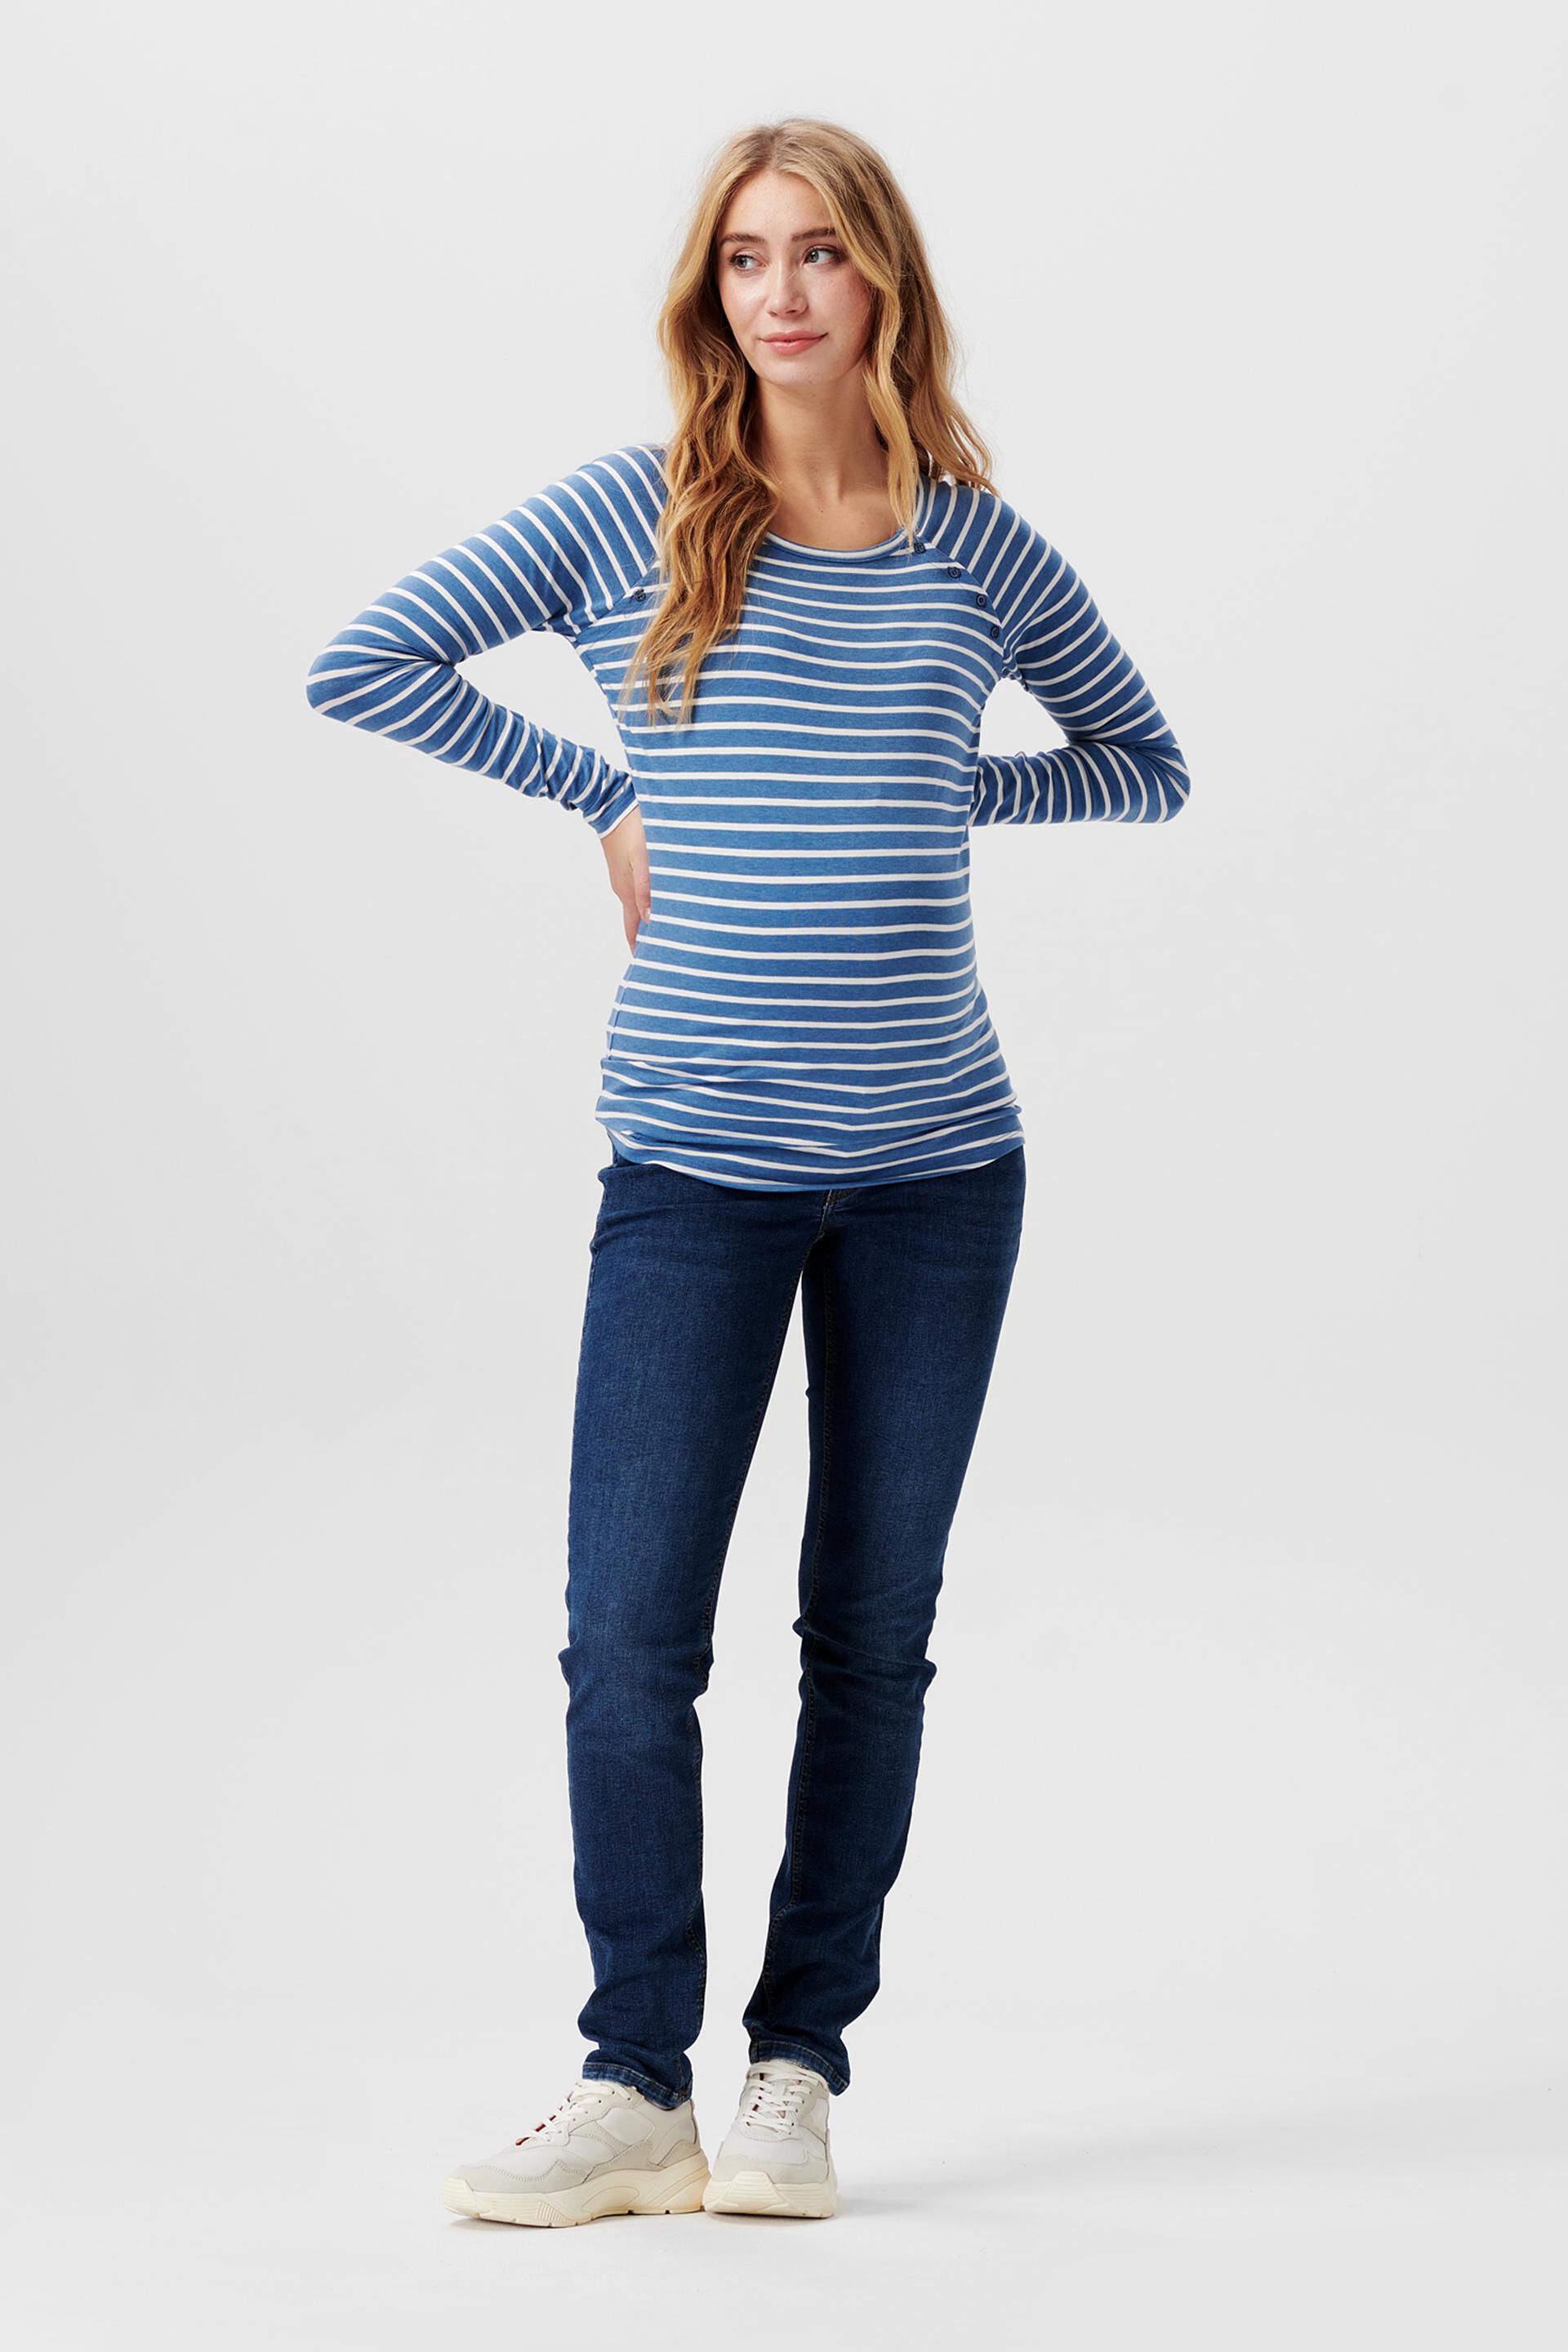 Esprit Striped long-sleeved cotton top, organic